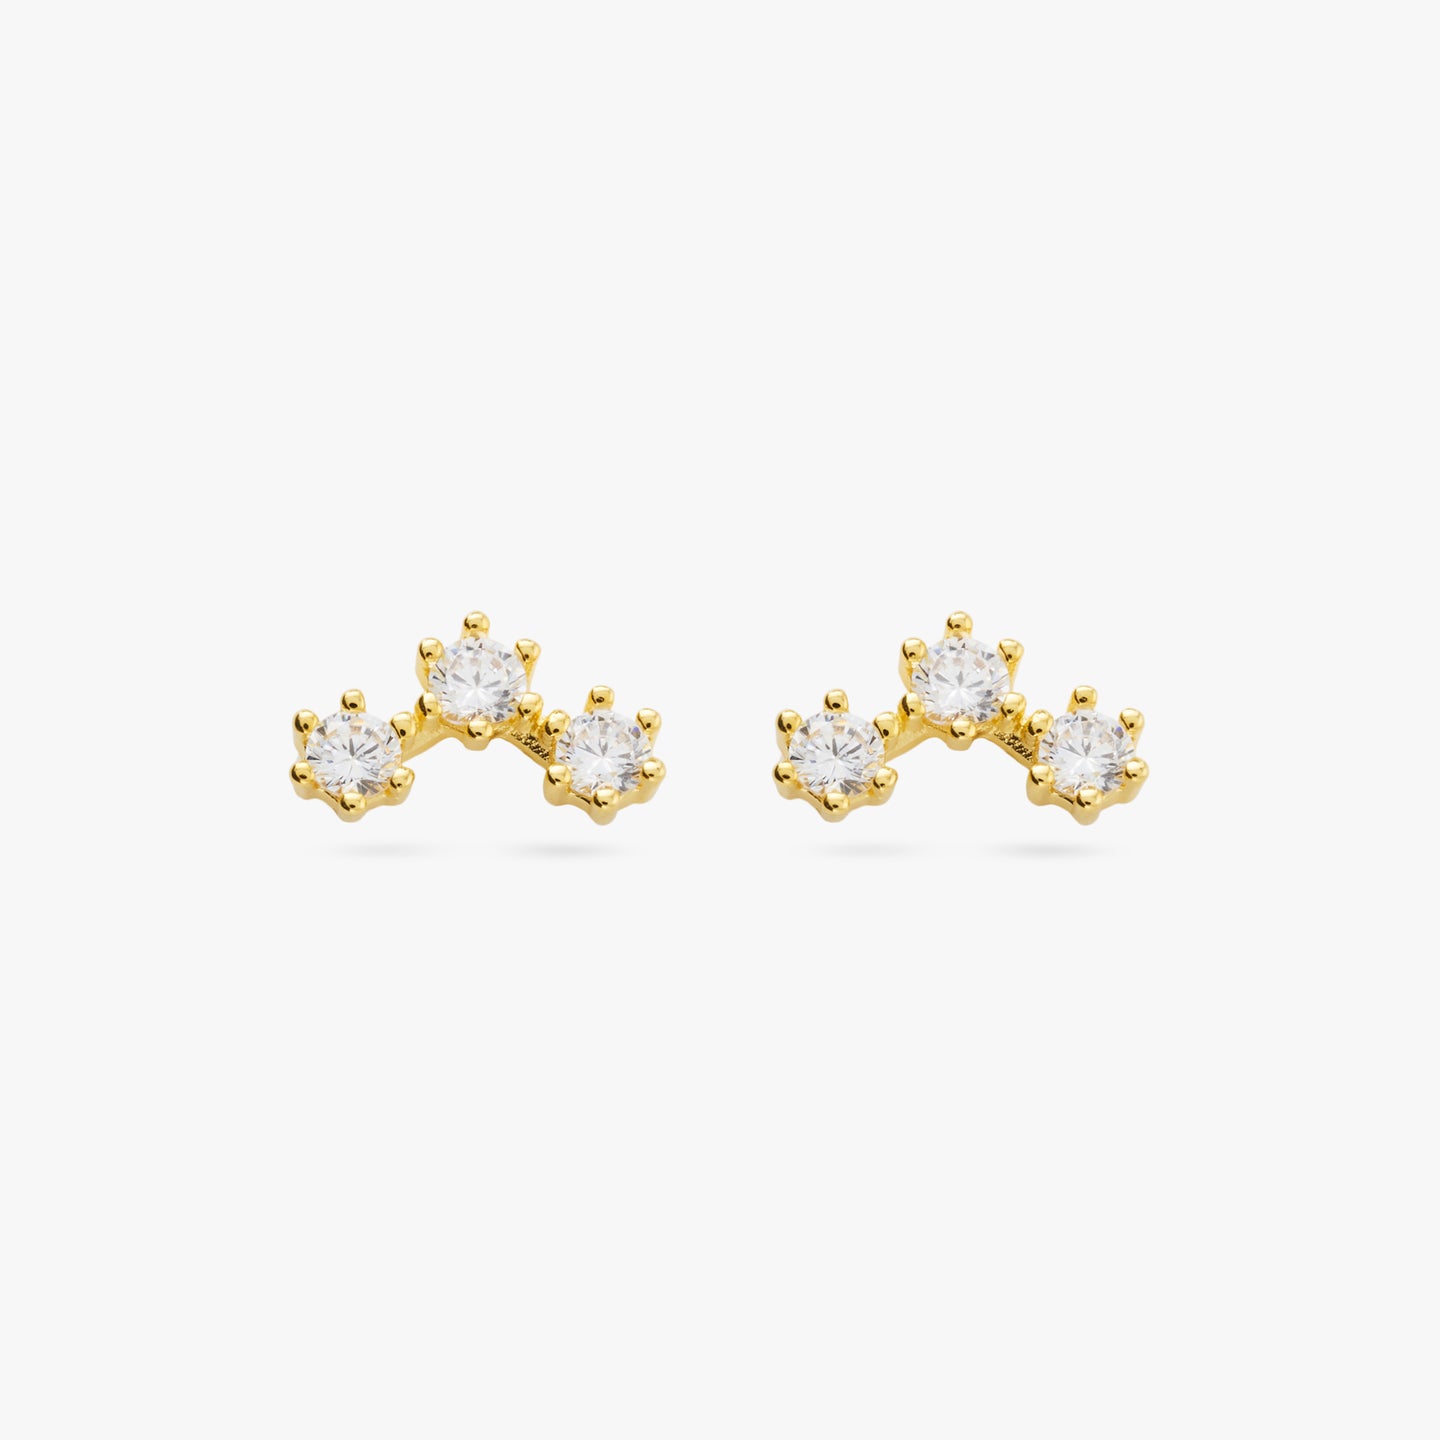 A pair of three cubic zirconia in an arch shaped gold cluster studs [pair] color:null|gold/clear